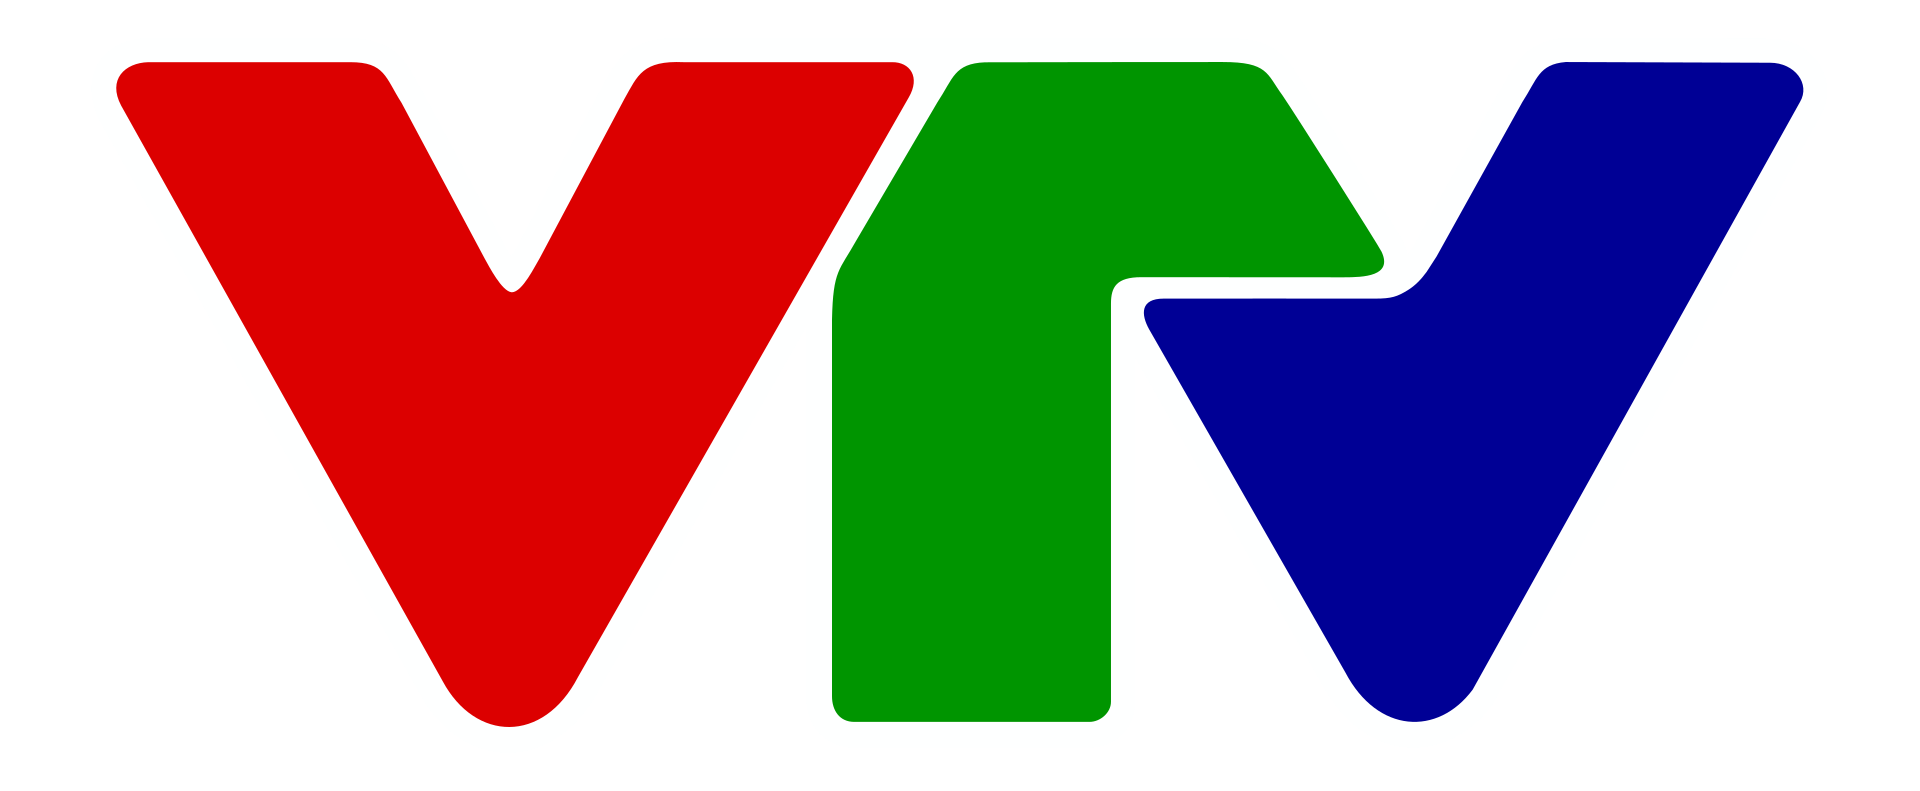 1920px-Vietnam_Television_logo_from_2013.svg.png